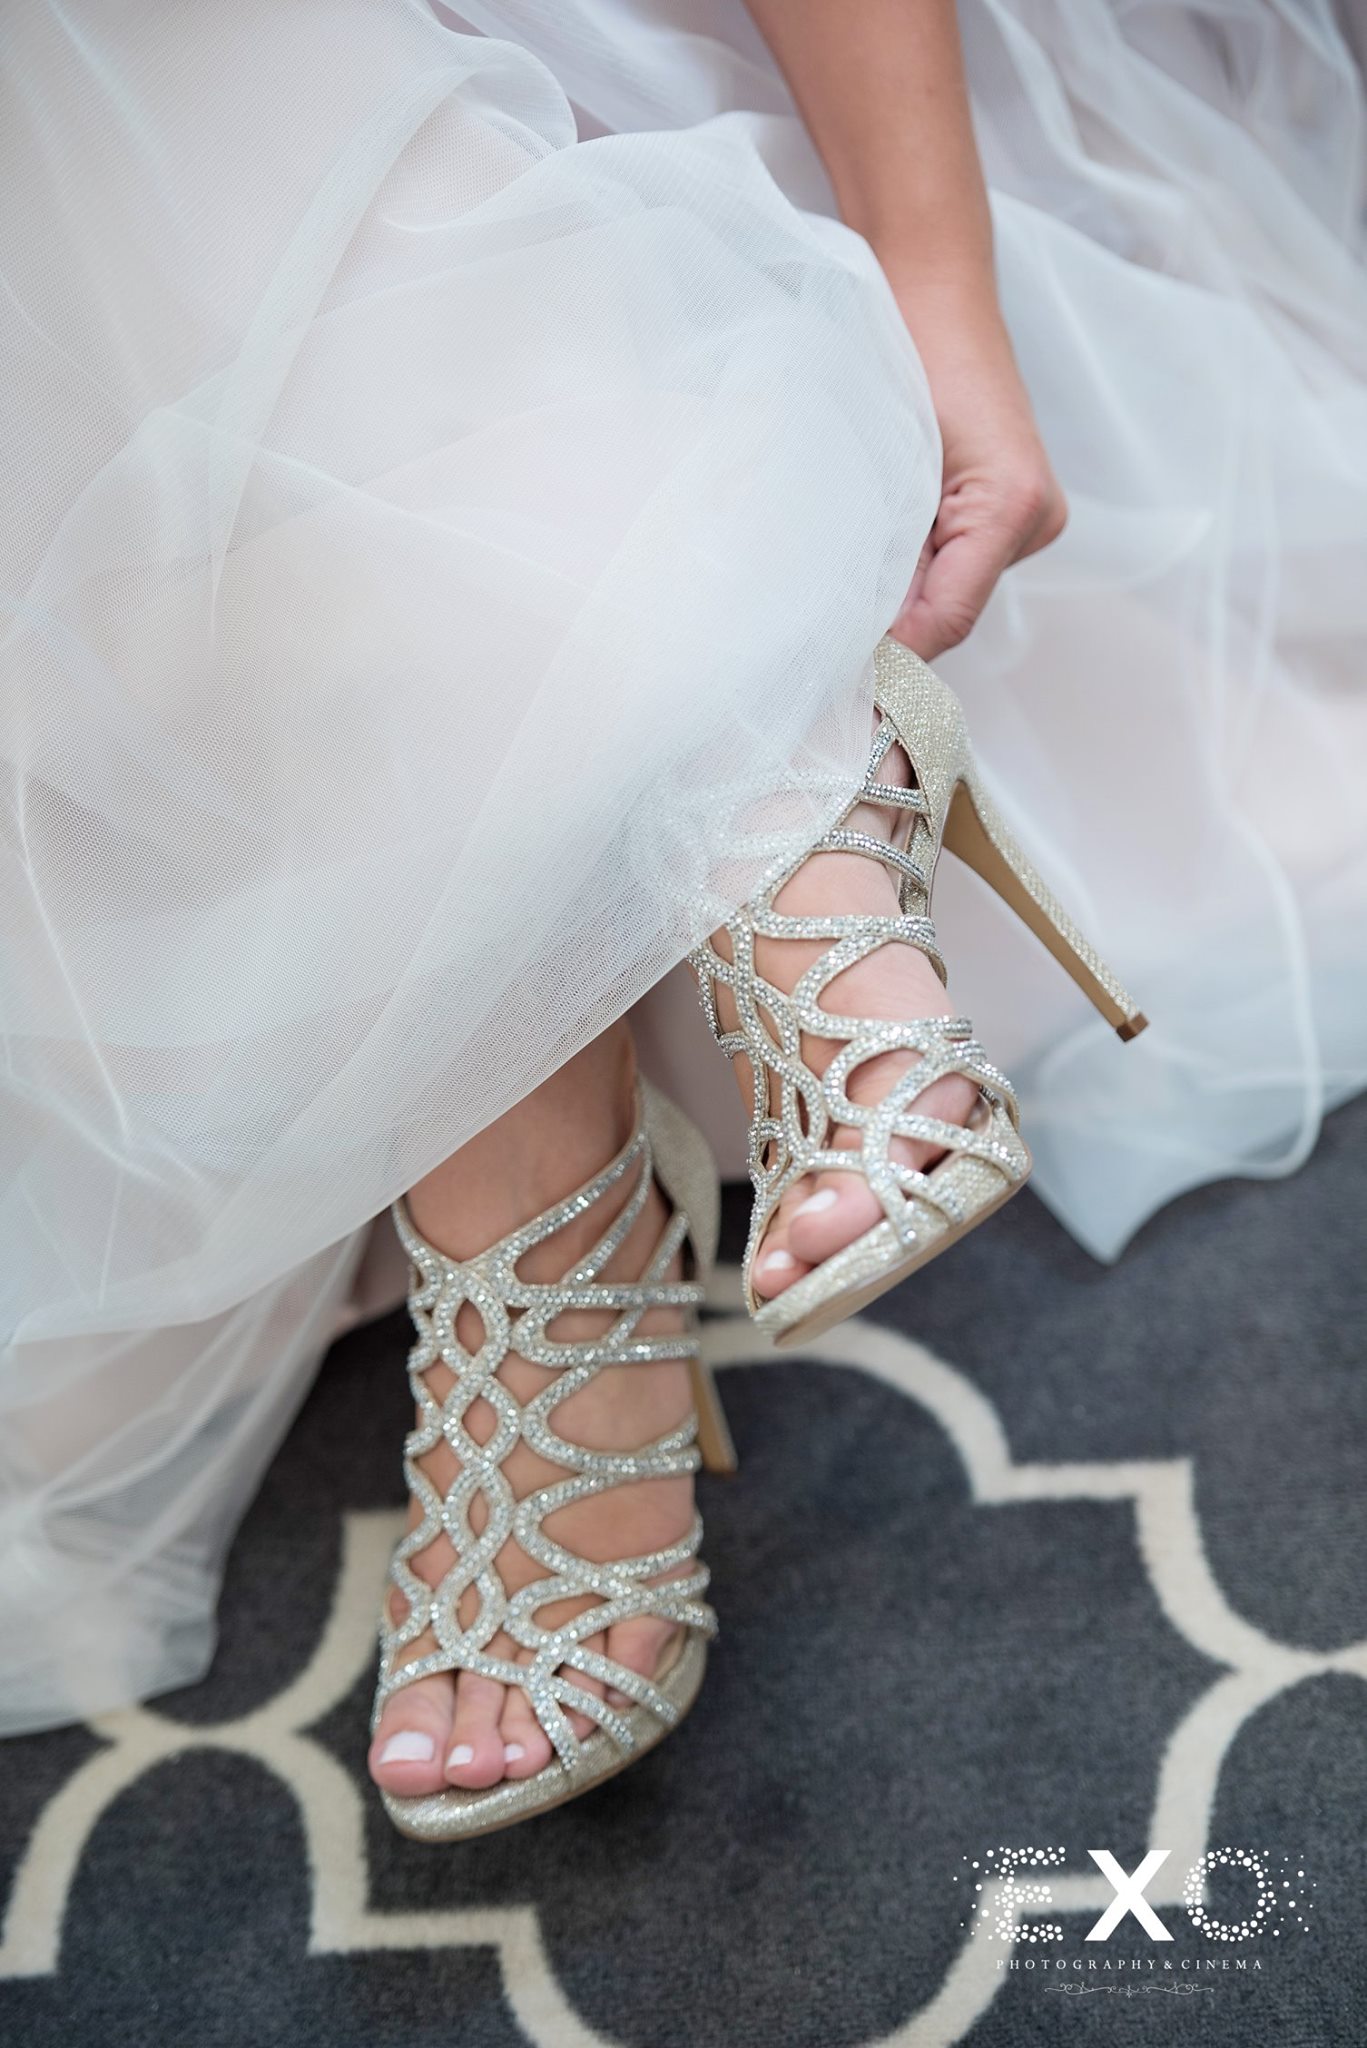 brides shoes and gown by kleinfeld bridal